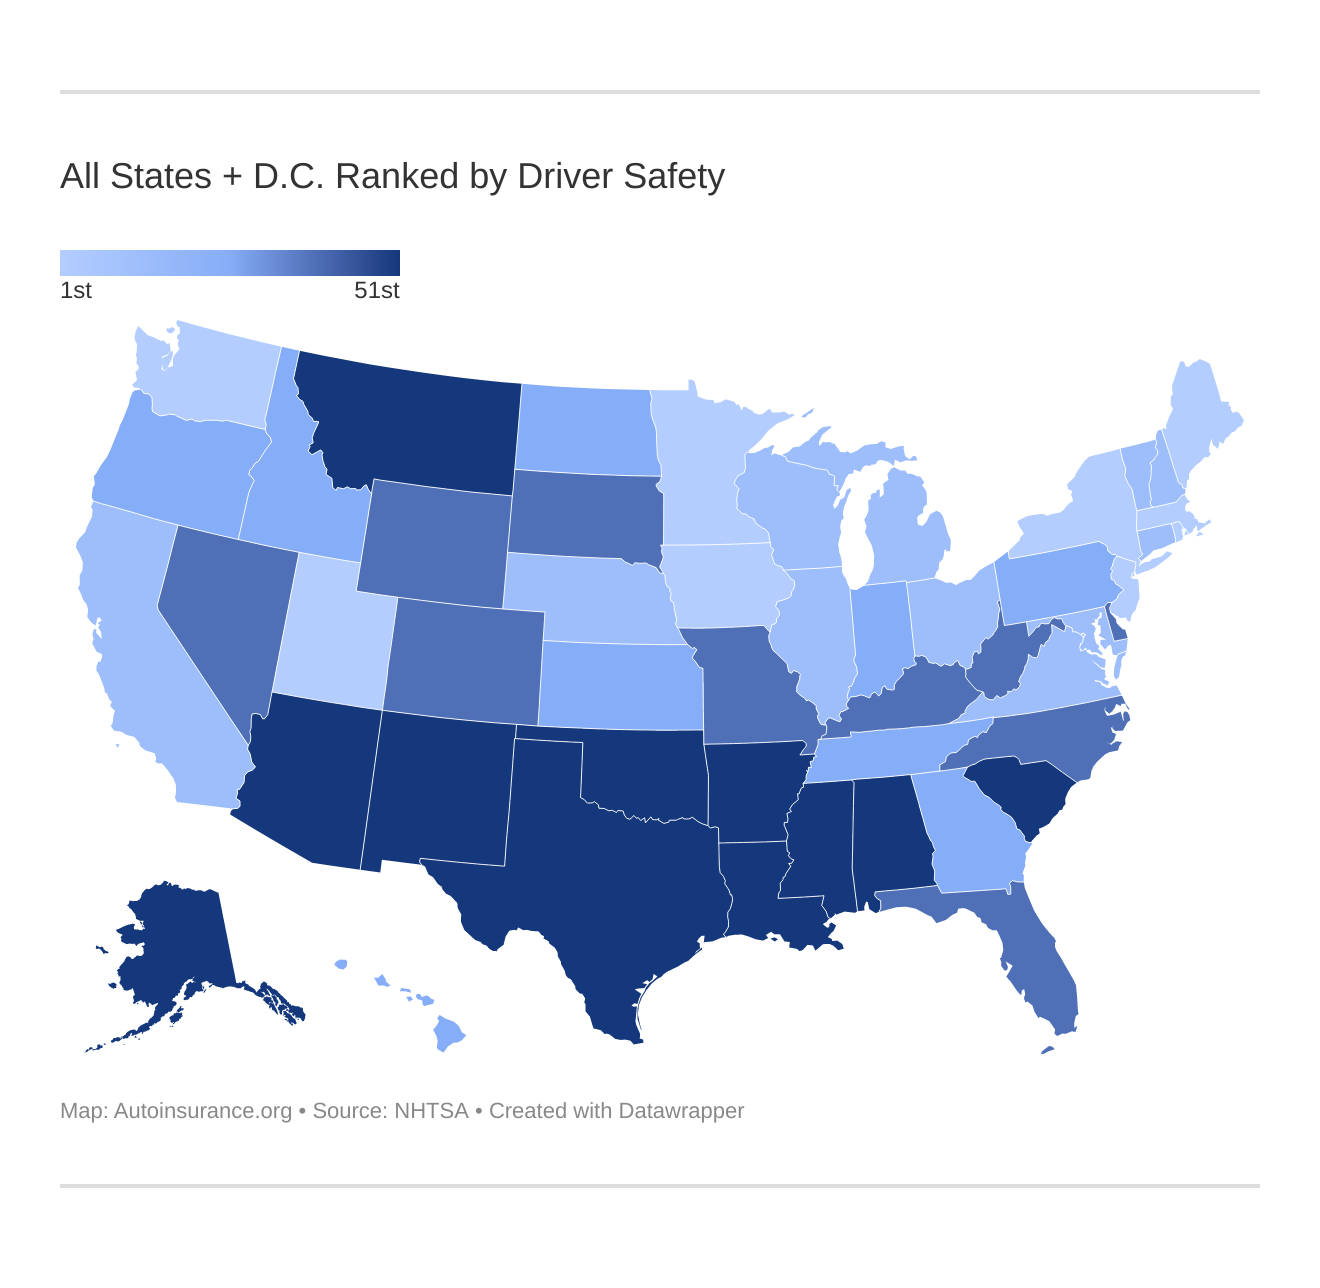 All States + D.C. Ranked by Driver Safety